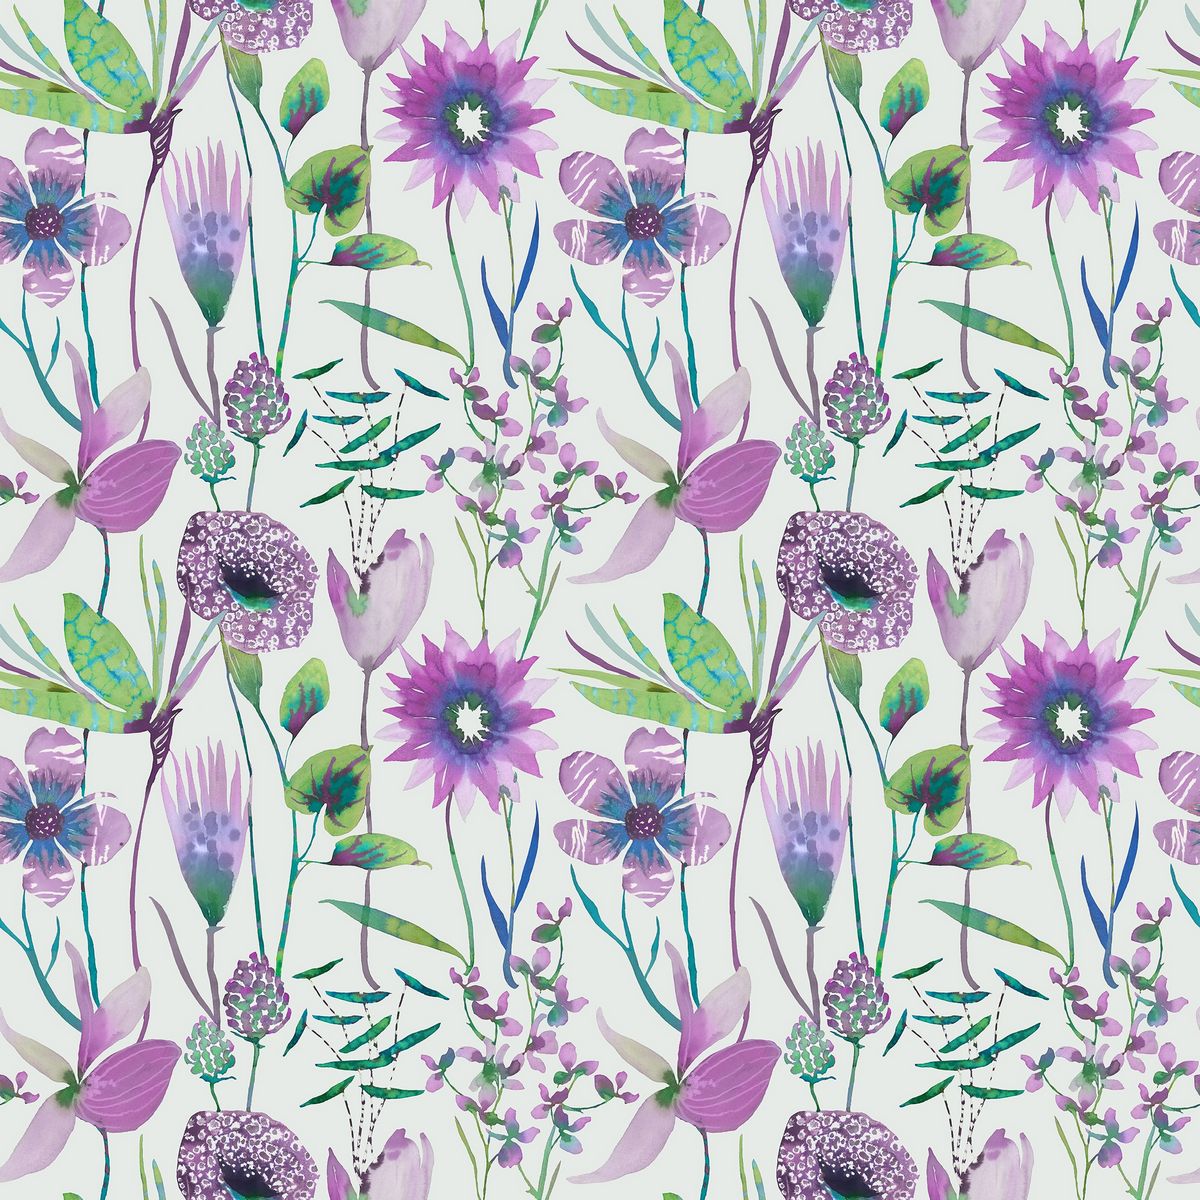 Oceania Aster Fabric by Voyage Maison